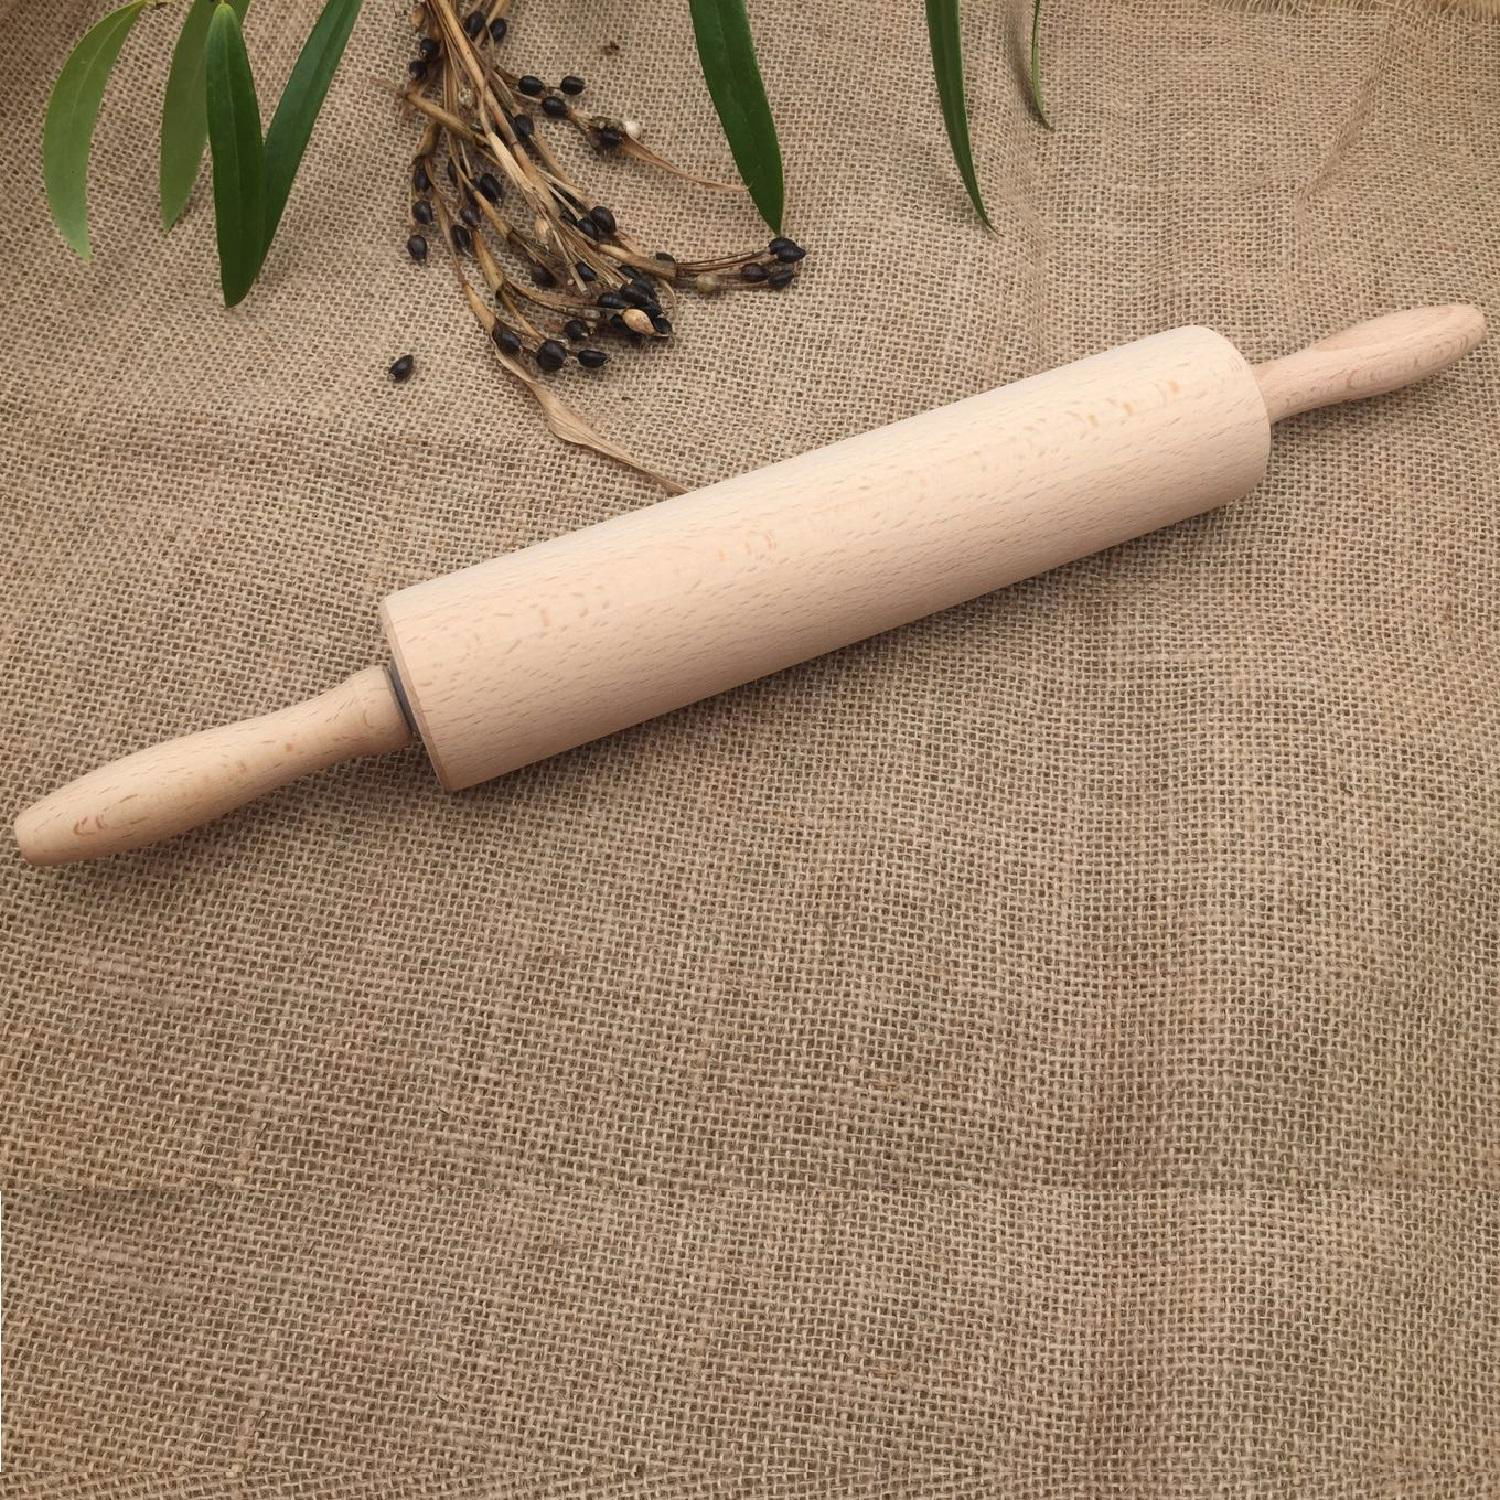 Wooden Rolling Pin Made of Rubber Wood